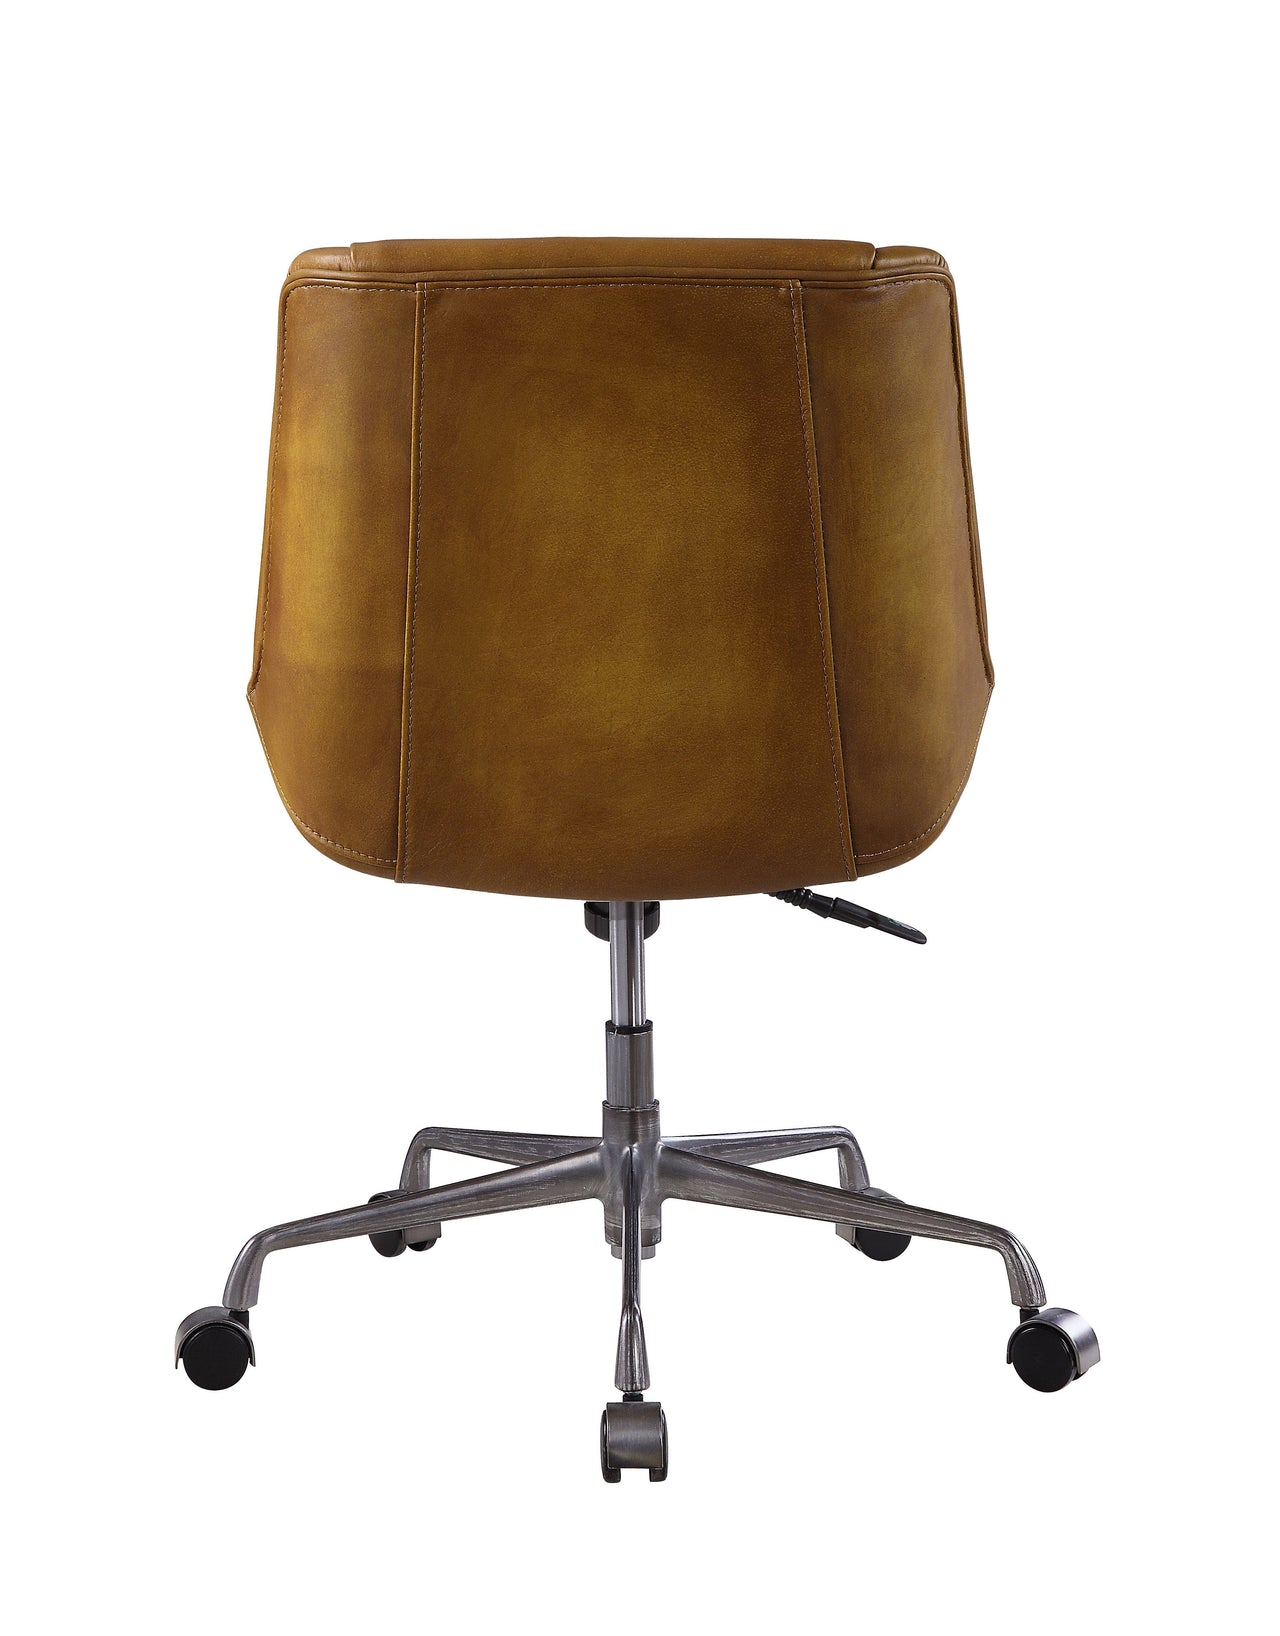 Ambler - Executive Office Chair - Saddle Brown Top Grain Leather - Tony's Home Furnishings